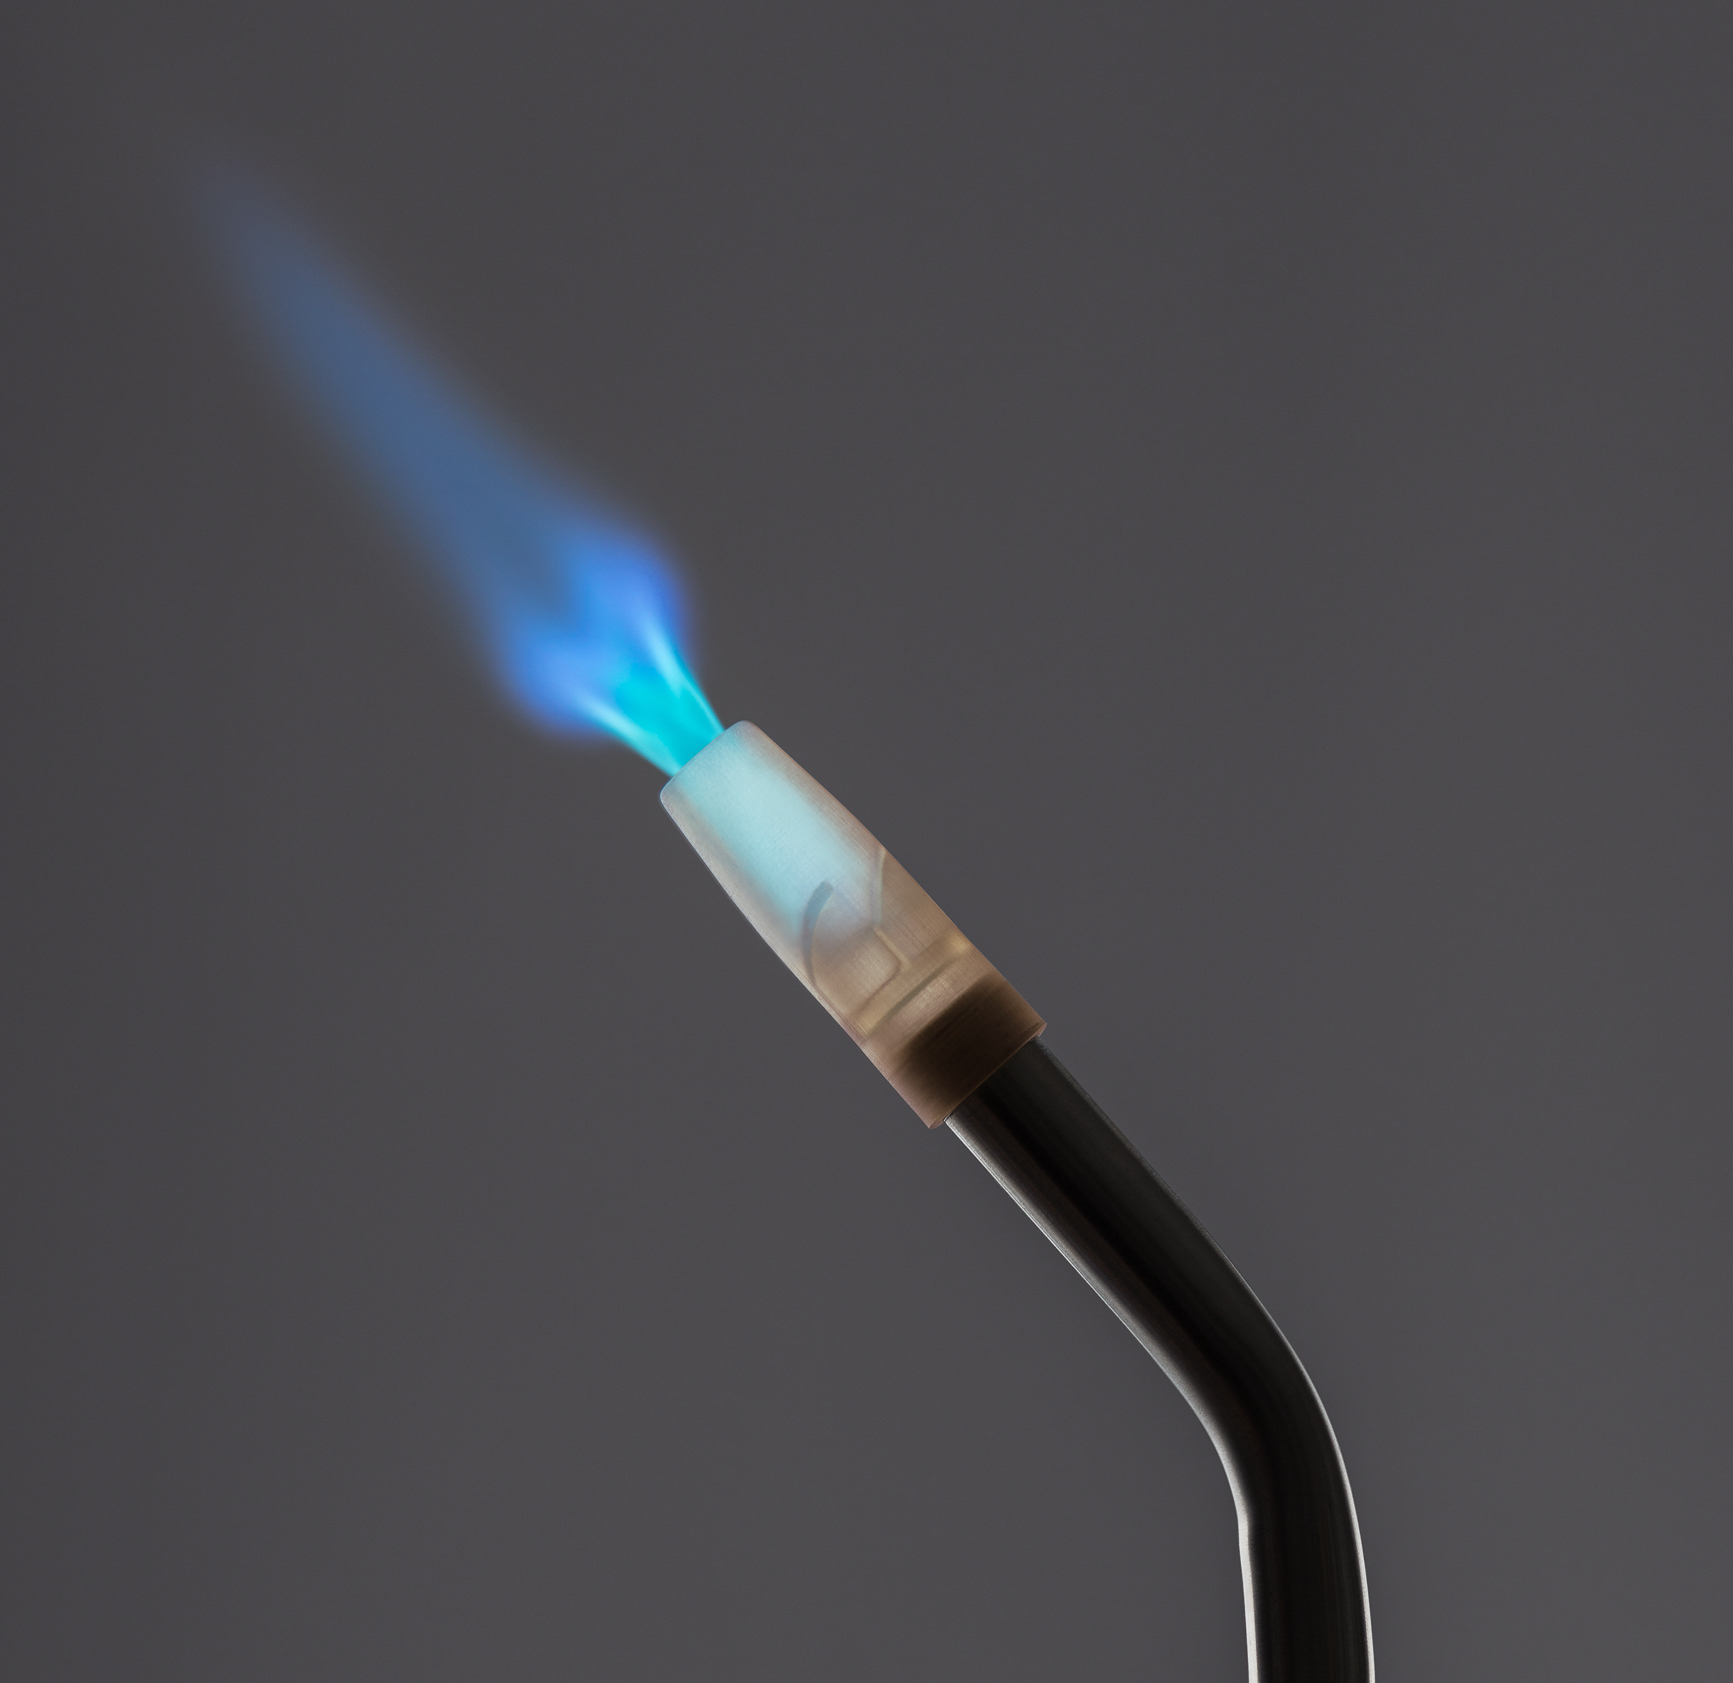  A 3D printed torch tip able to withstand high temperatures made with Formlabs' new resin 